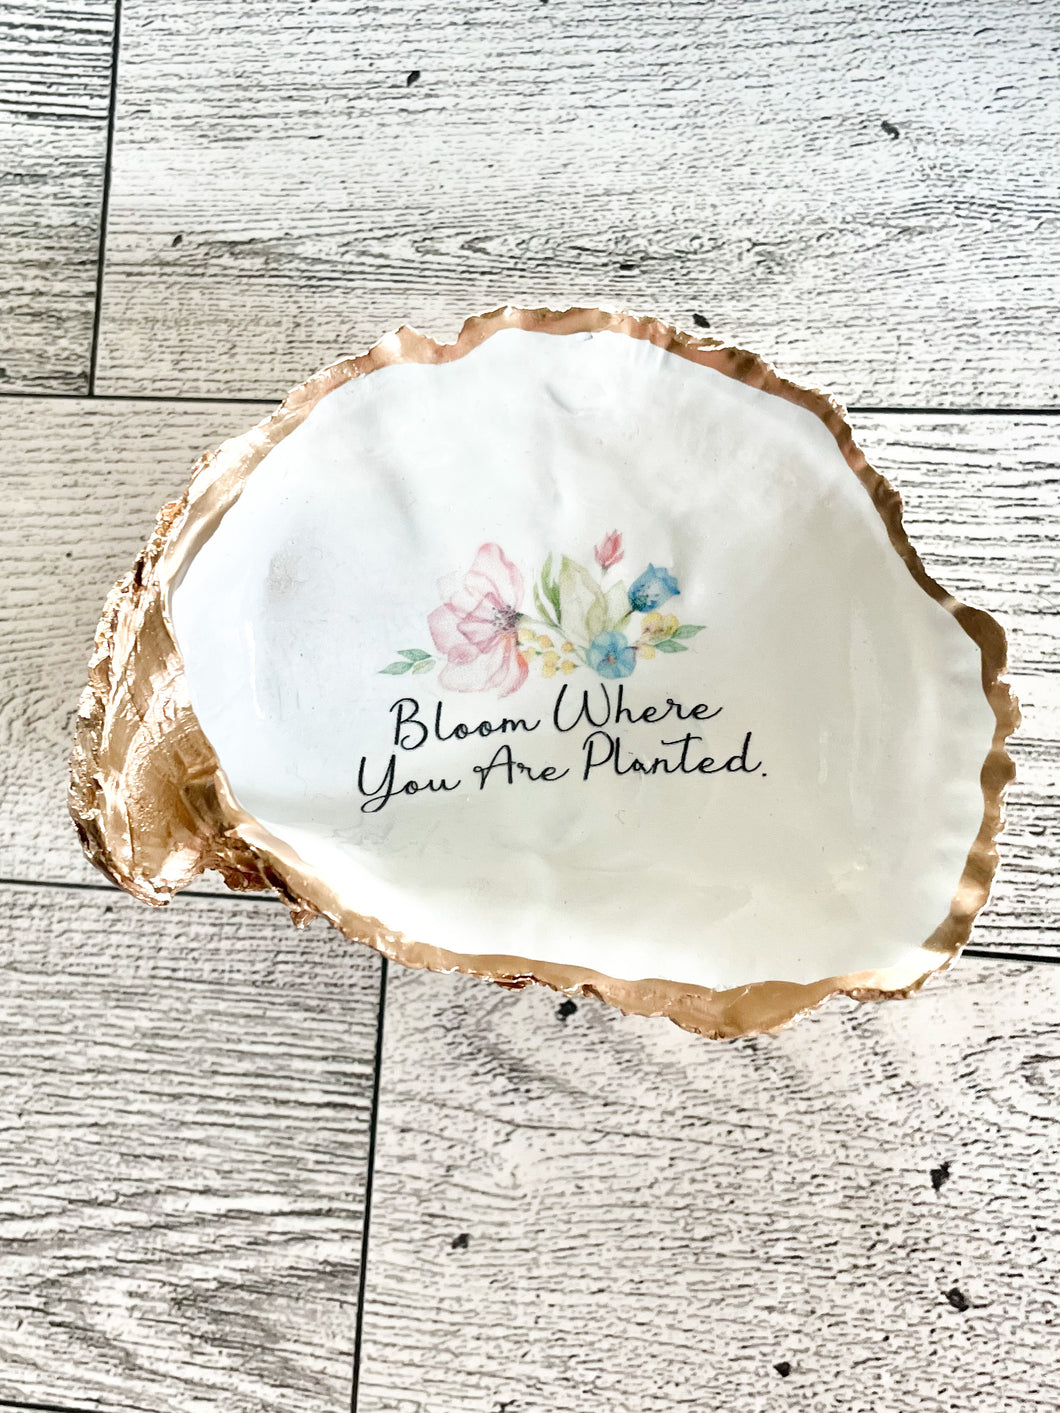 Statement Oyster Shell Trinket Dish   Bloom Where You Are Planted